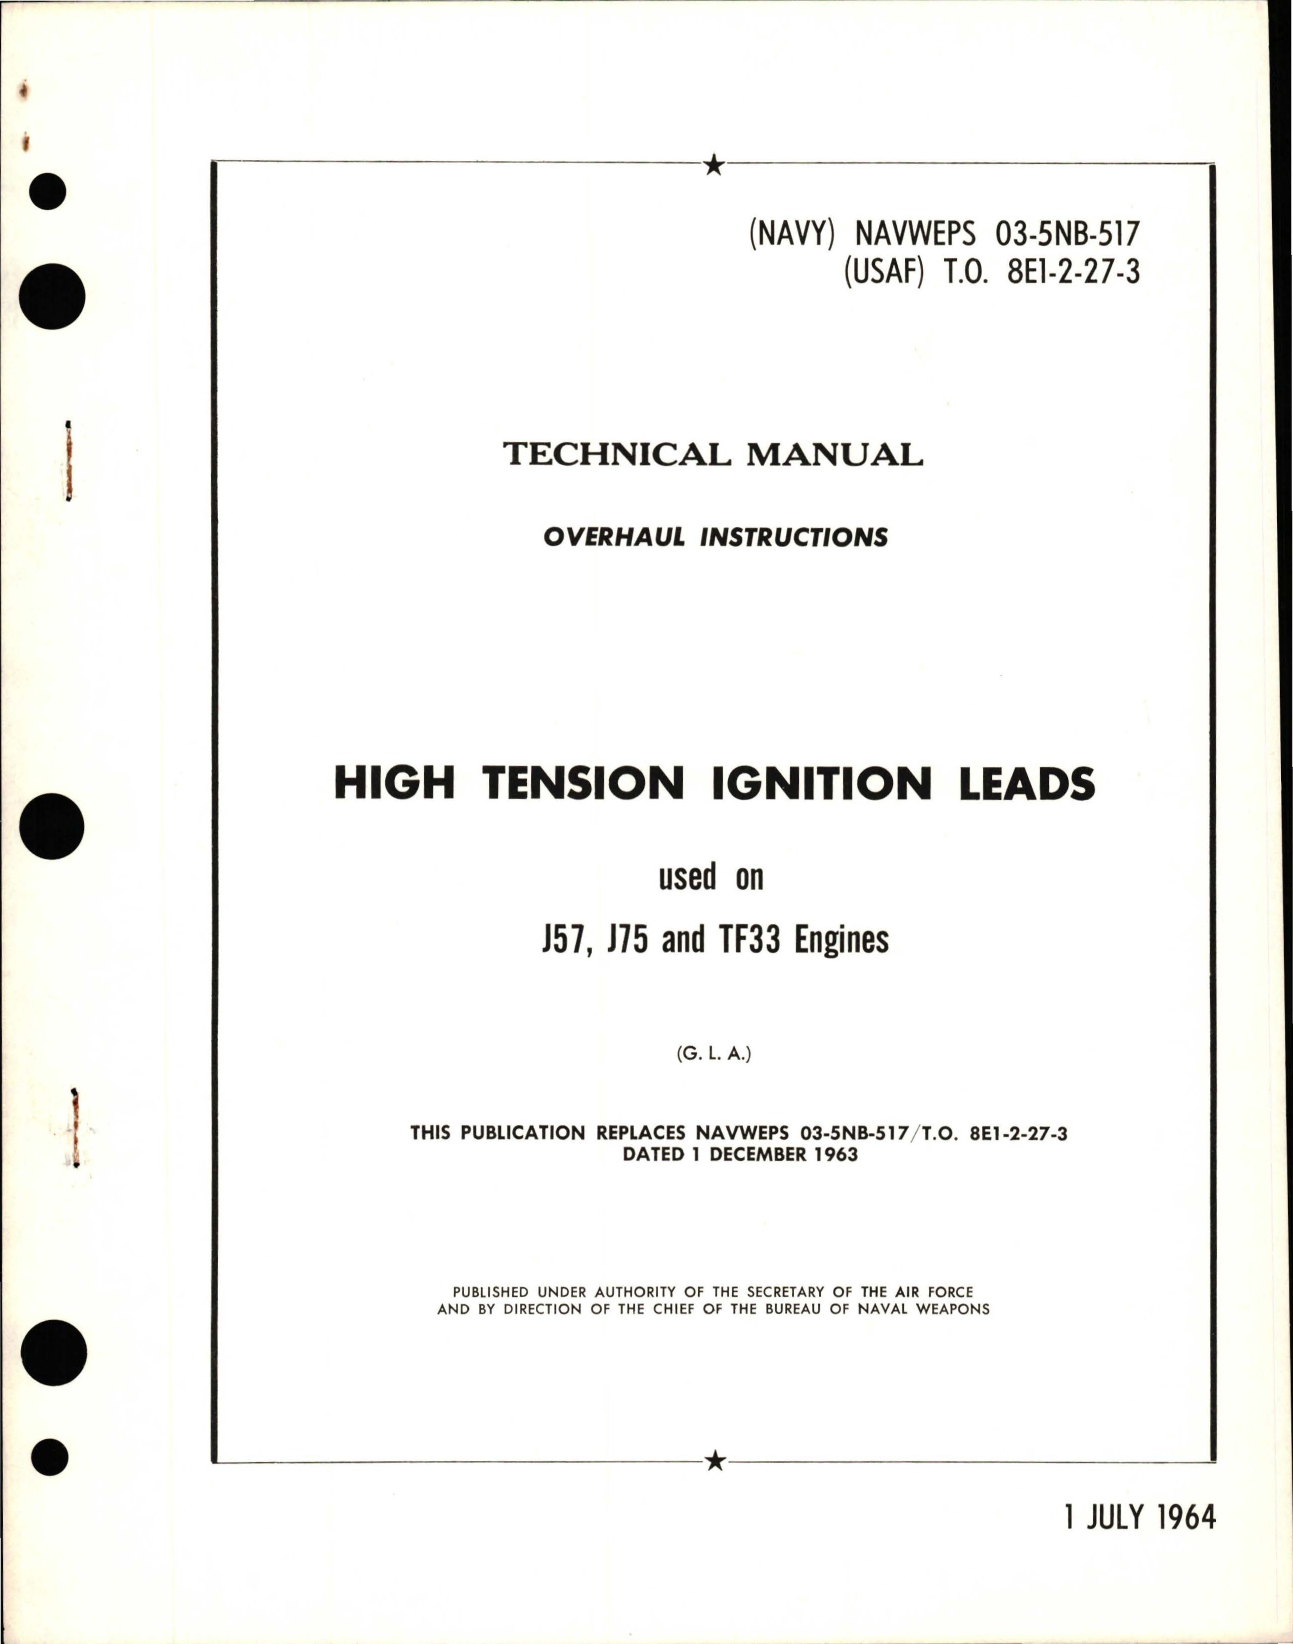 Sample page 1 from AirCorps Library document: Overhaul Instructions for High Tension Ignition Leads 